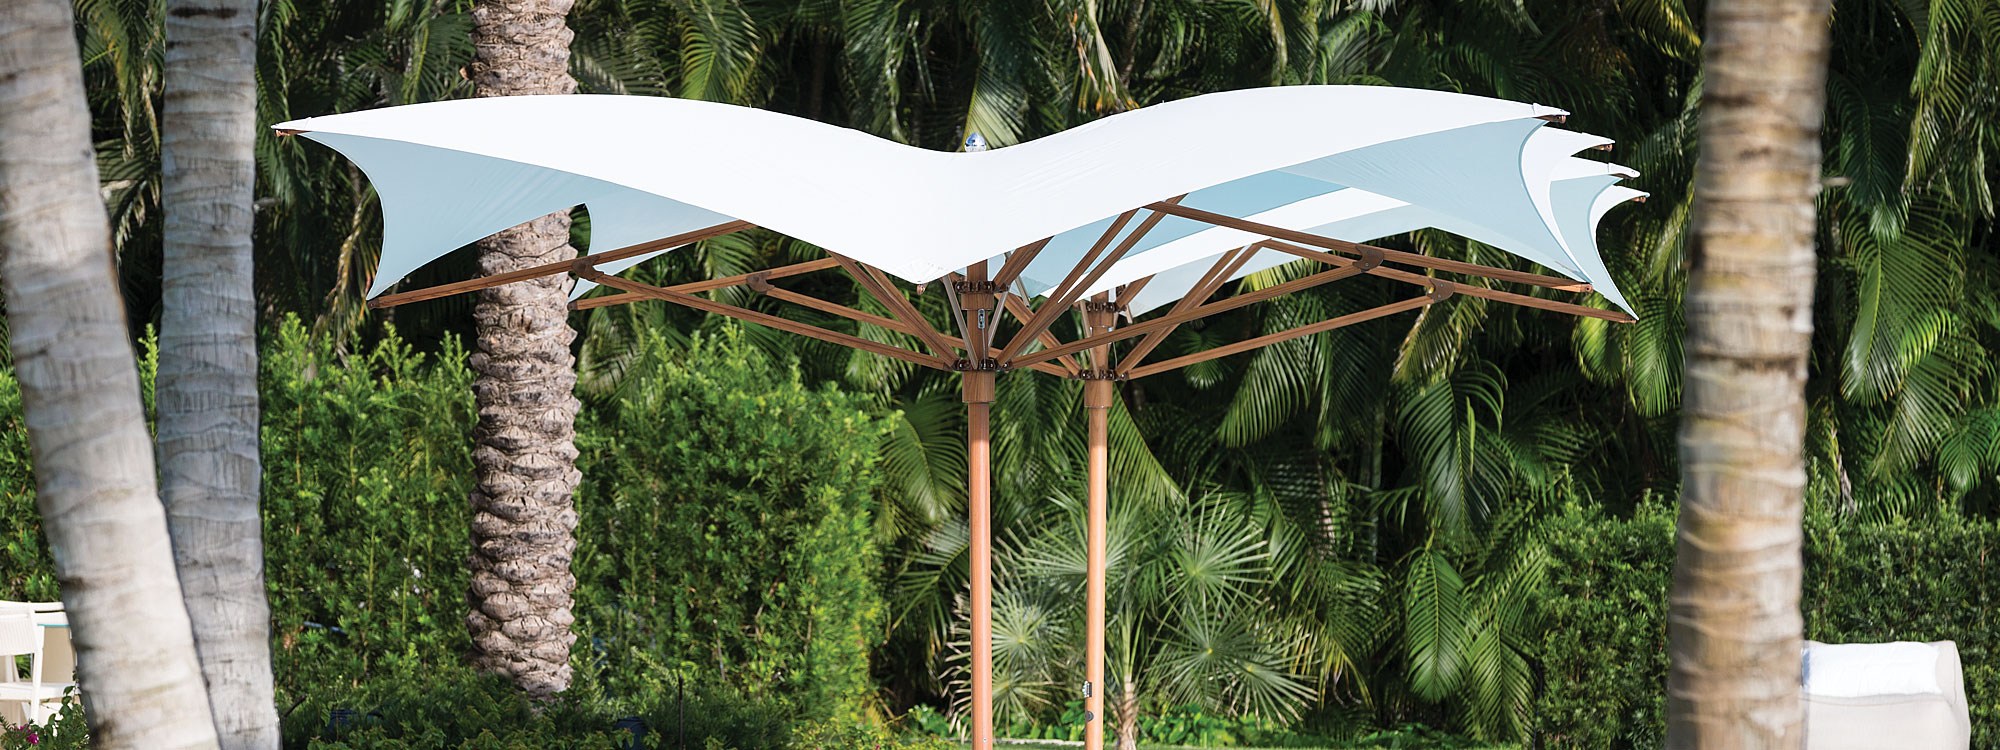 Image of pair of Ocean Master Max mast parasols with Aluma Teak wood-effect mast and ribs and white canopies